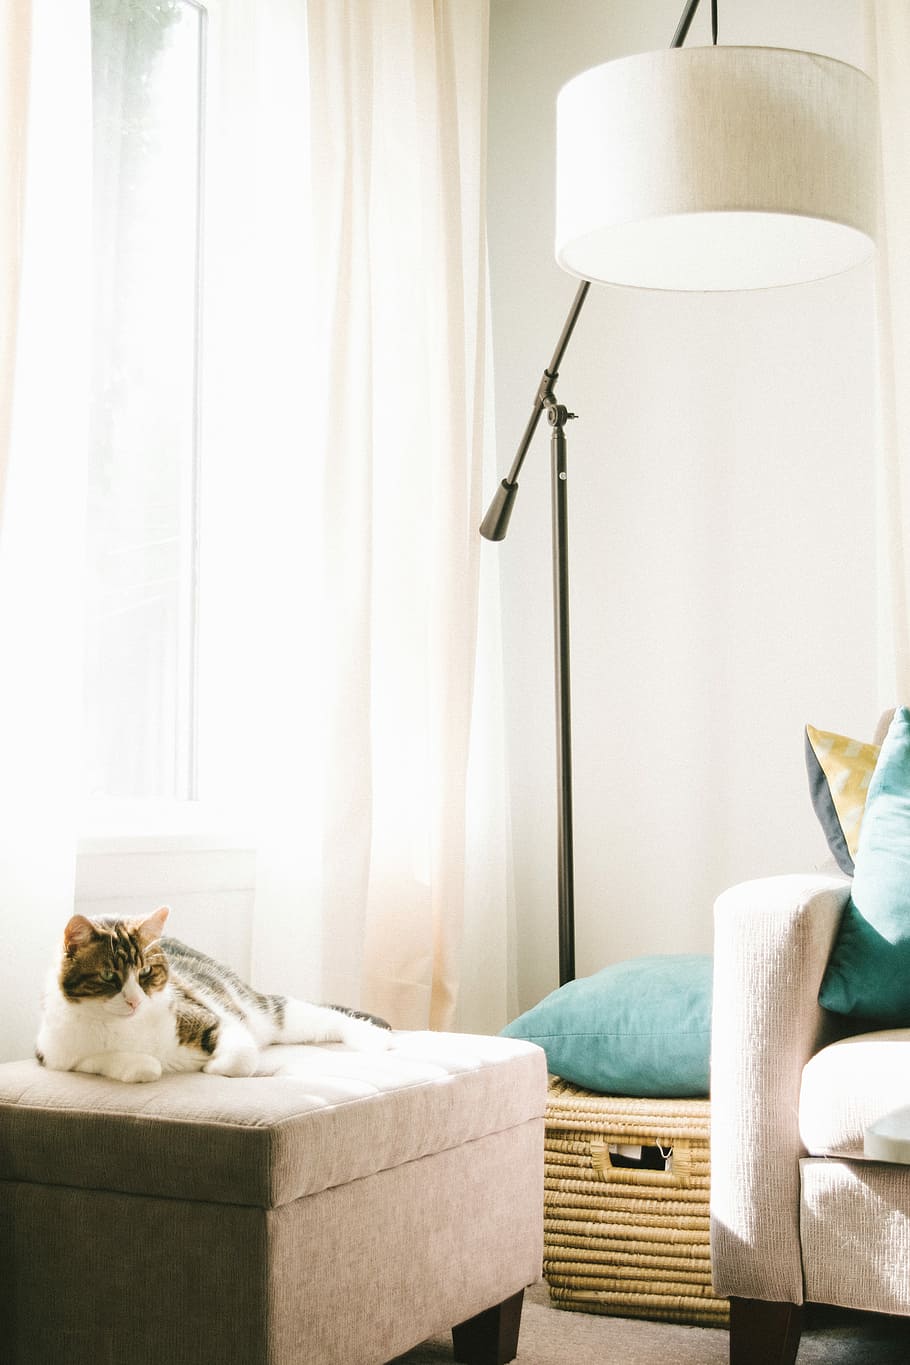 gray and white cat lying on brown ottoman near sofa, clothes hamper and floor lamp inside well-lighted room, calico cat on gray ottoman beside floor lamp